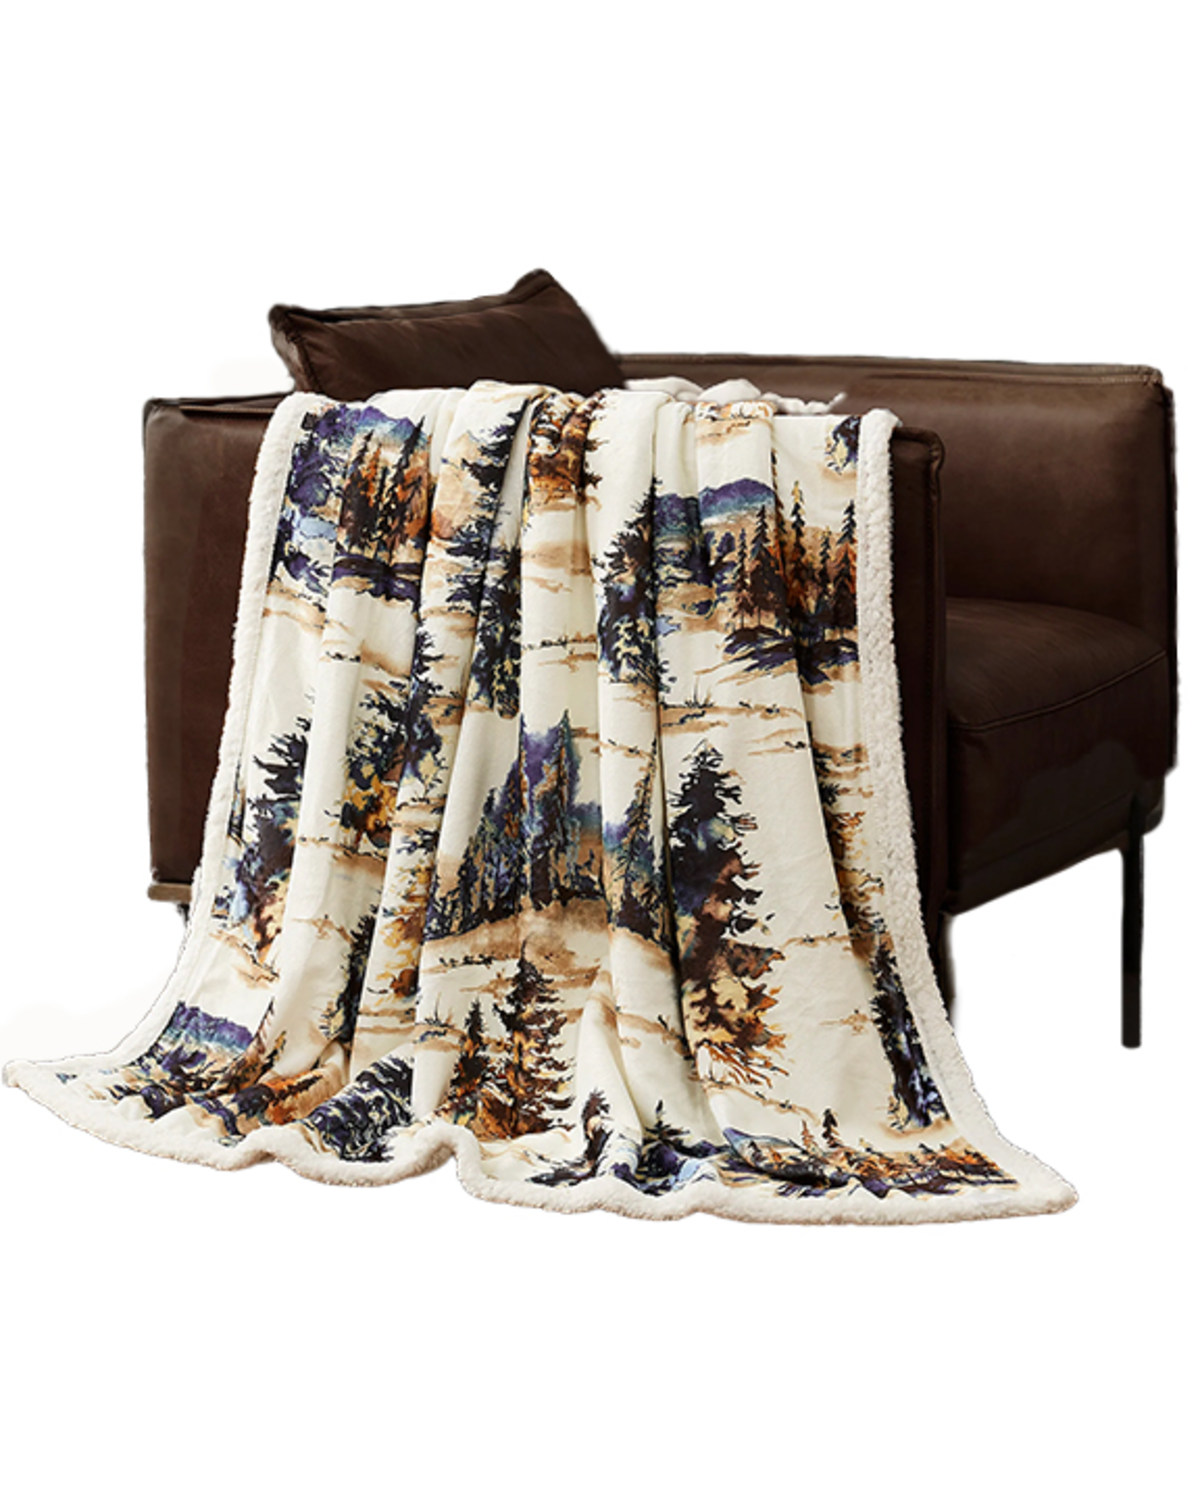 HiEnd Accents Acadia Campfire Sherpa Throw